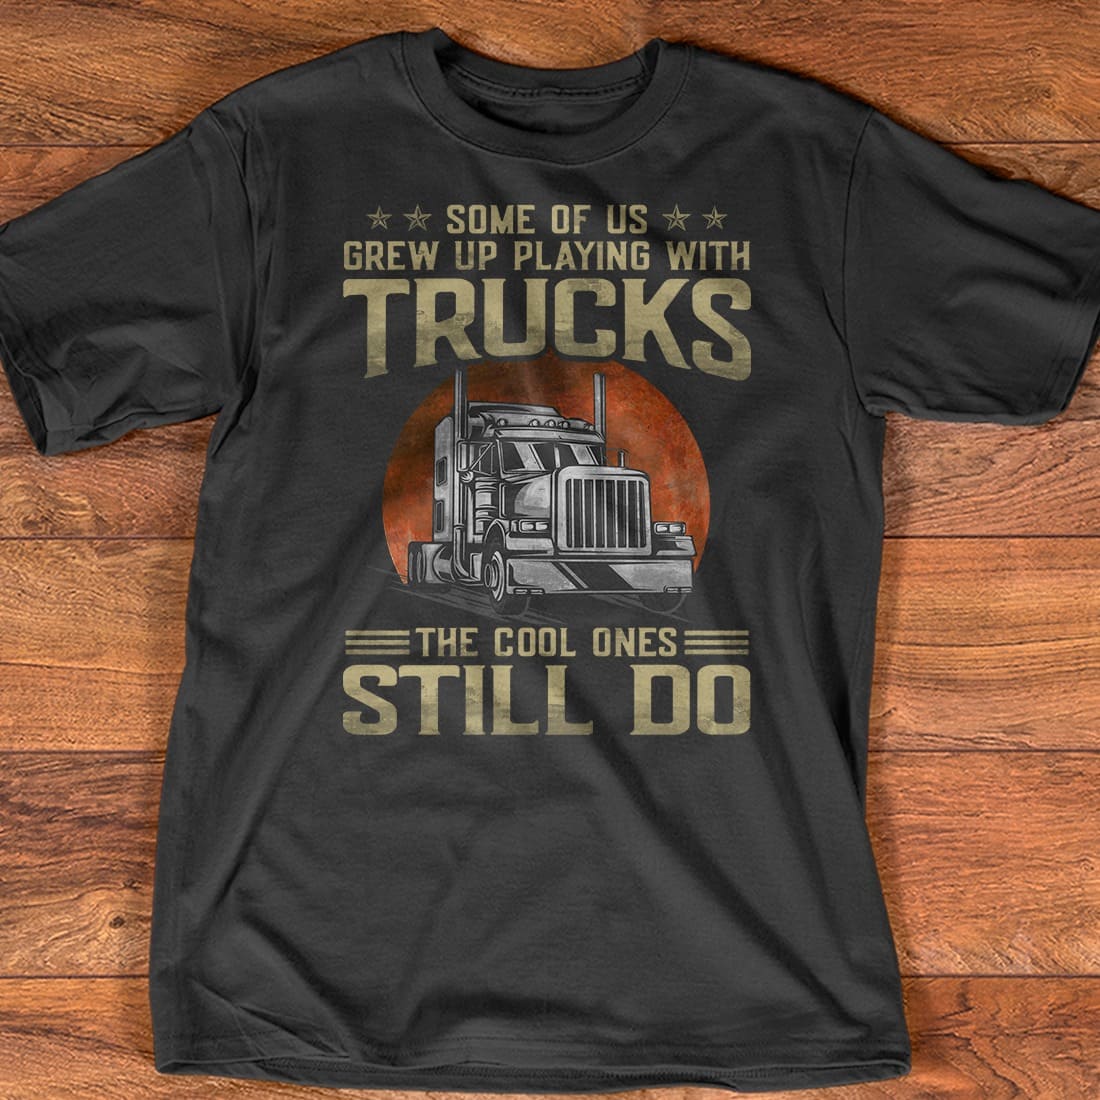 Some of us grew up playing with trucks the cool ones still do - Gift for trucker